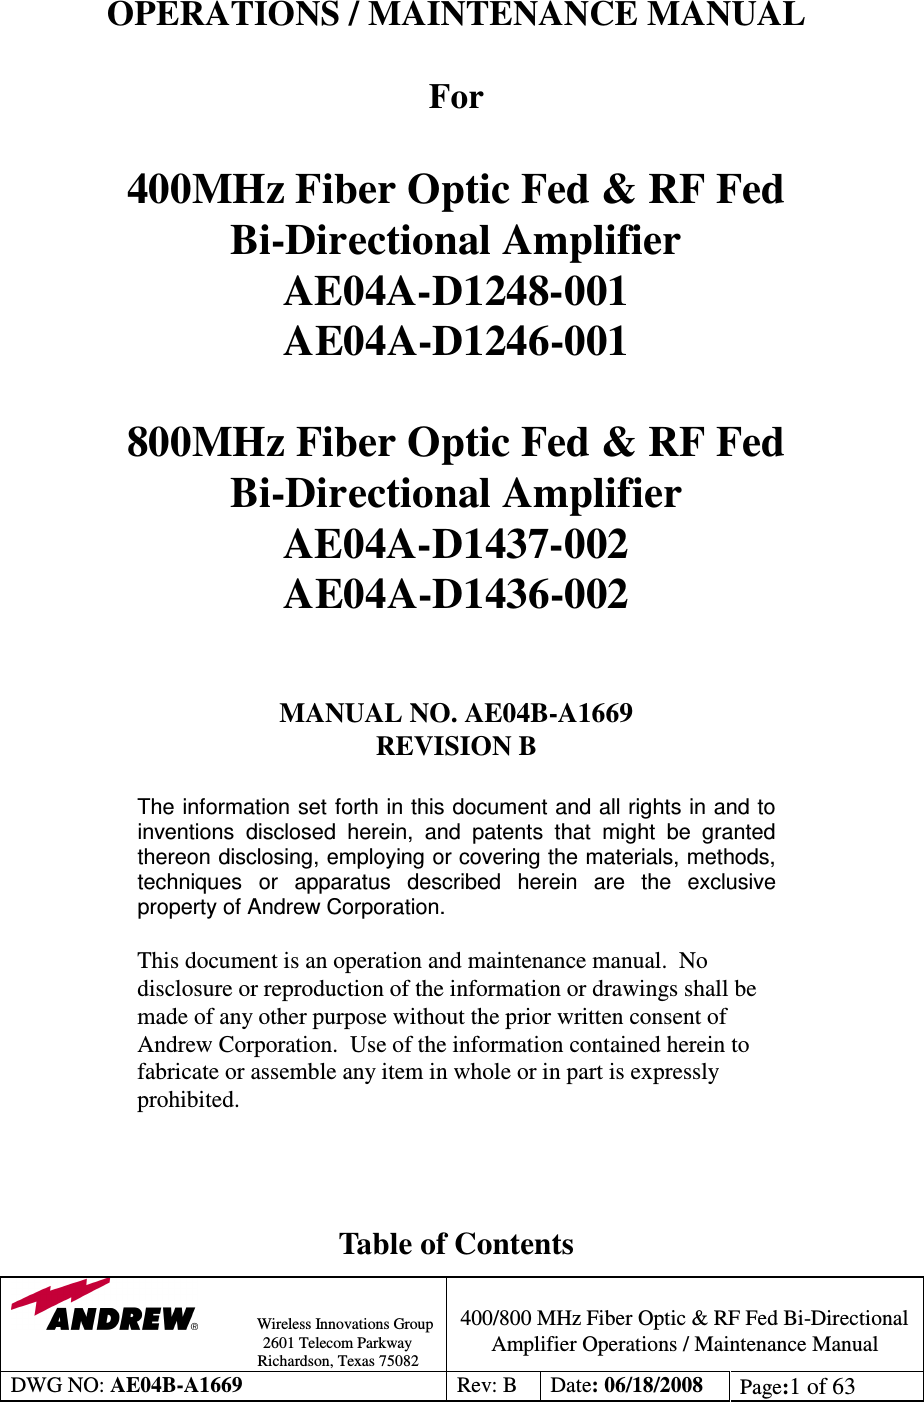                Wireless Innovations Group                                                                                        2601 Telecom Parkway                                                         Richardson, Texas 75082  400/800 MHz Fiber Optic &amp; RF Fed Bi-Directional Amplifier Operations / Maintenance Manual DWG NO: AE04B-A1669  Rev: B  Date: 06/18/2008  Page:1 of 63   OPERATIONS / MAINTENANCE MANUAL  For   400MHz Fiber Optic Fed &amp; RF Fed  Bi-Directional Amplifier AE04A-D1248-001 AE04A-D1246-001  800MHz Fiber Optic Fed &amp; RF Fed  Bi-Directional Amplifier AE04A-D1437-002 AE04A-D1436-002   MANUAL NO. AE04B-A1669  REVISION B  The information set forth in this document and all rights in and to inventions  disclosed  herein,  and  patents  that  might  be  granted thereon disclosing, employing or covering the materials, methods, techniques  or  apparatus  described  herein  are  the  exclusive property of Andrew Corporation.  This document is an operation and maintenance manual.  No disclosure or reproduction of the information or drawings shall be made of any other purpose without the prior written consent of Andrew Corporation.  Use of the information contained herein to fabricate or assemble any item in whole or in part is expressly prohibited.    Table of Contents 